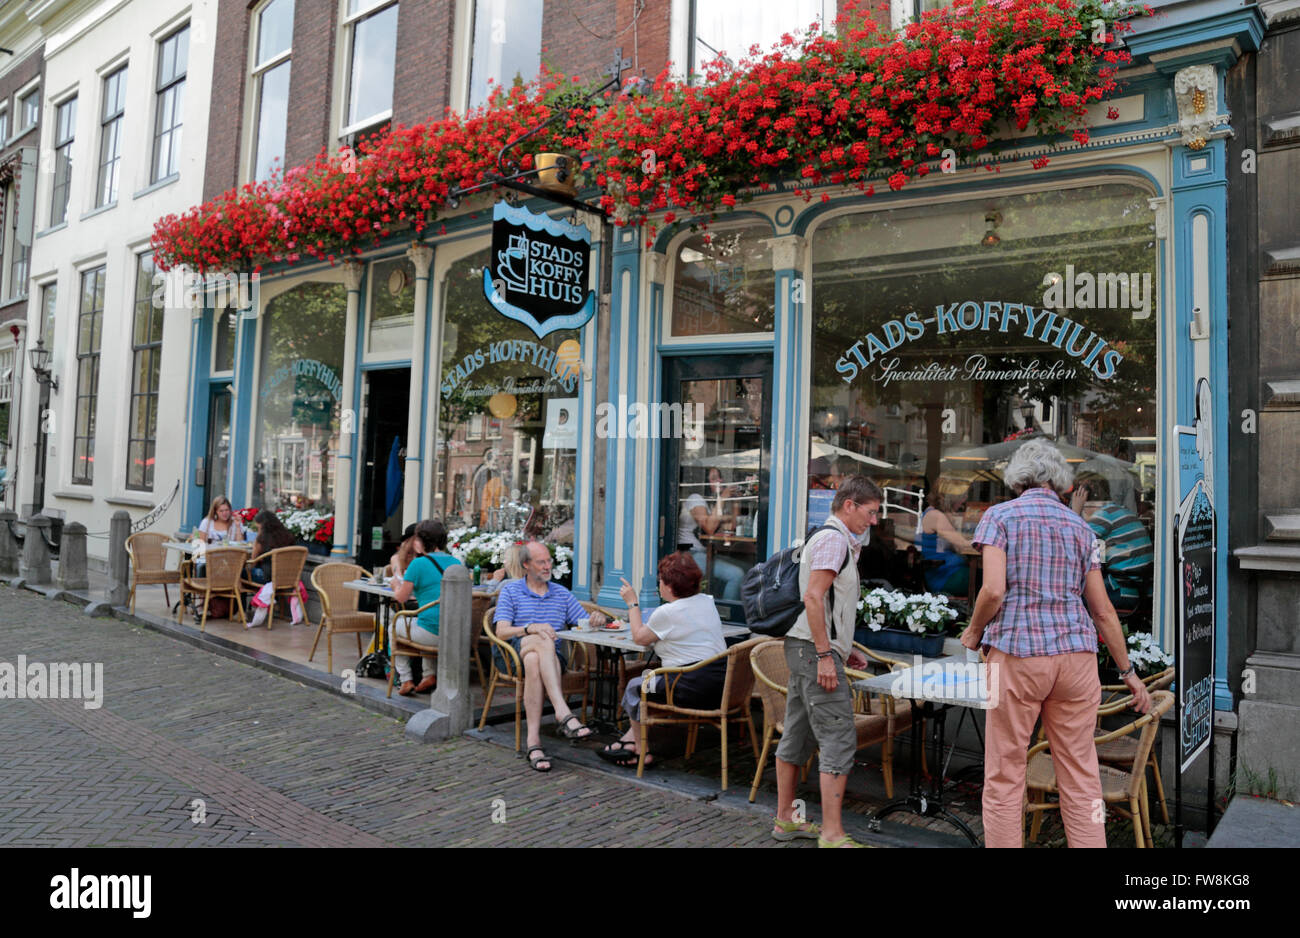 The Stads-Koffyhuis coffee shop in Delft, South Holland, Netherlands. Stock Photo